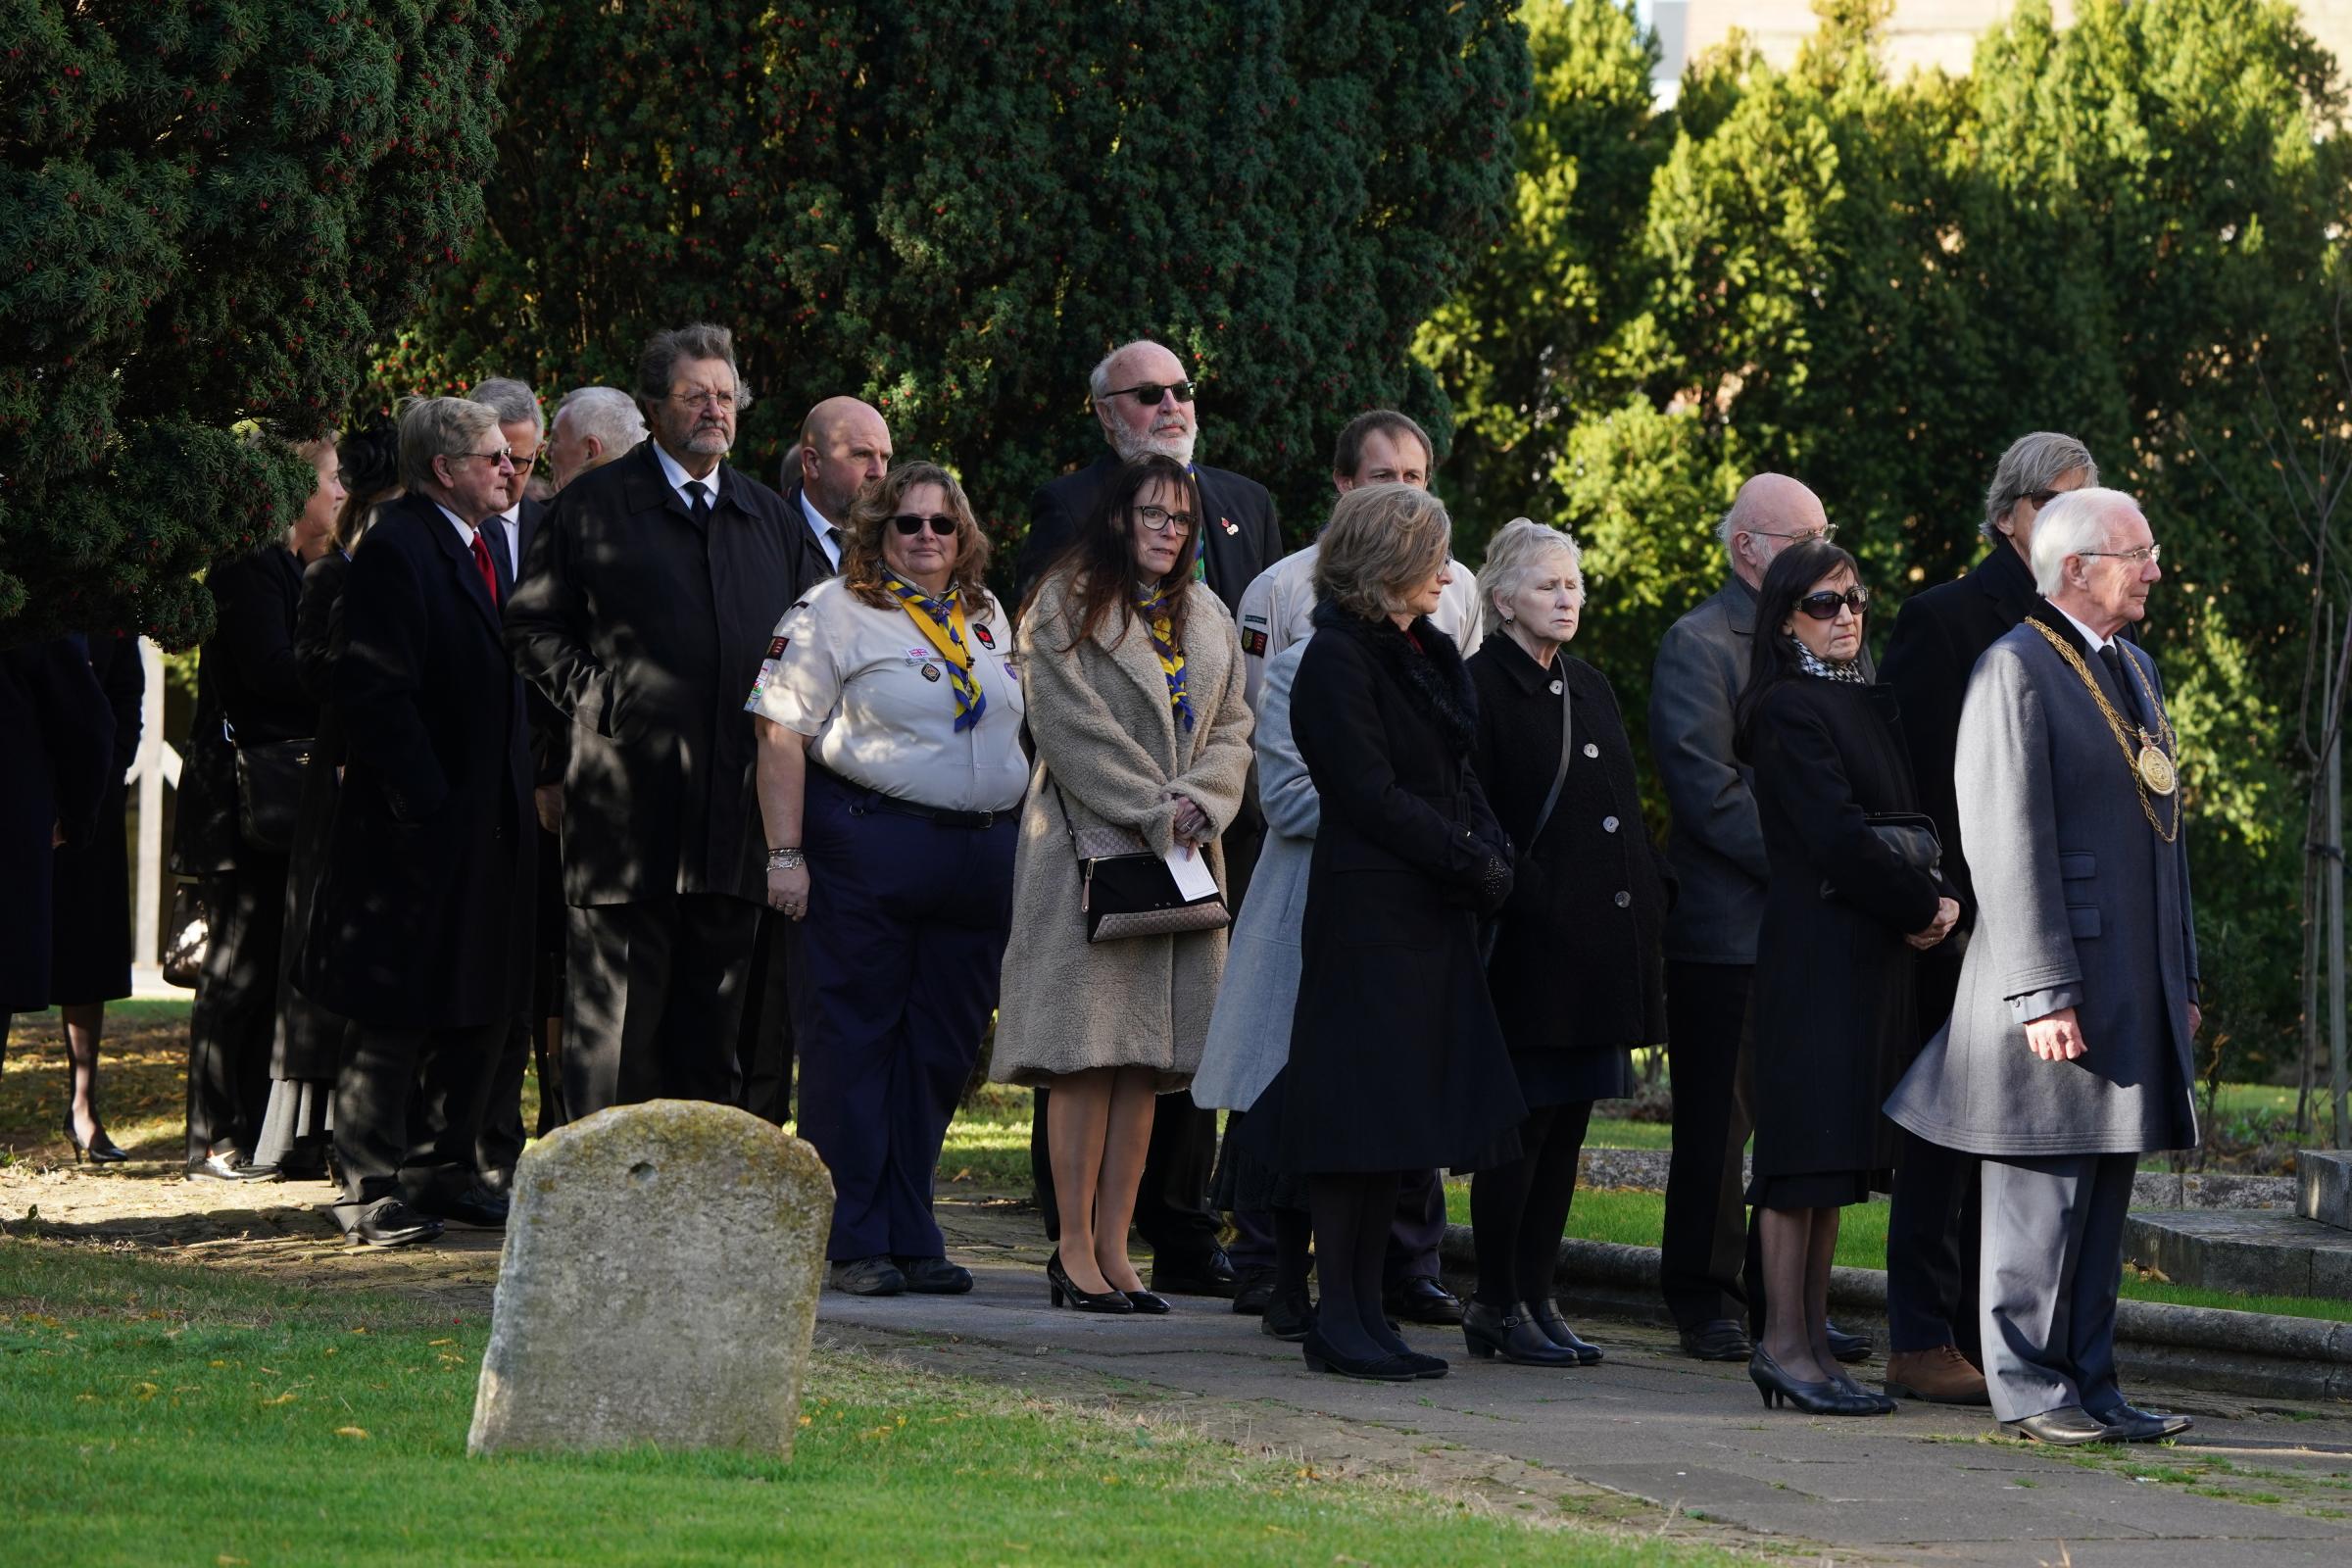 Mourners arrive ahead of the funeral of Sir David Amess at St Marys Church in Prittlewell, Southend. Picture date: Monday November 22, 2021.